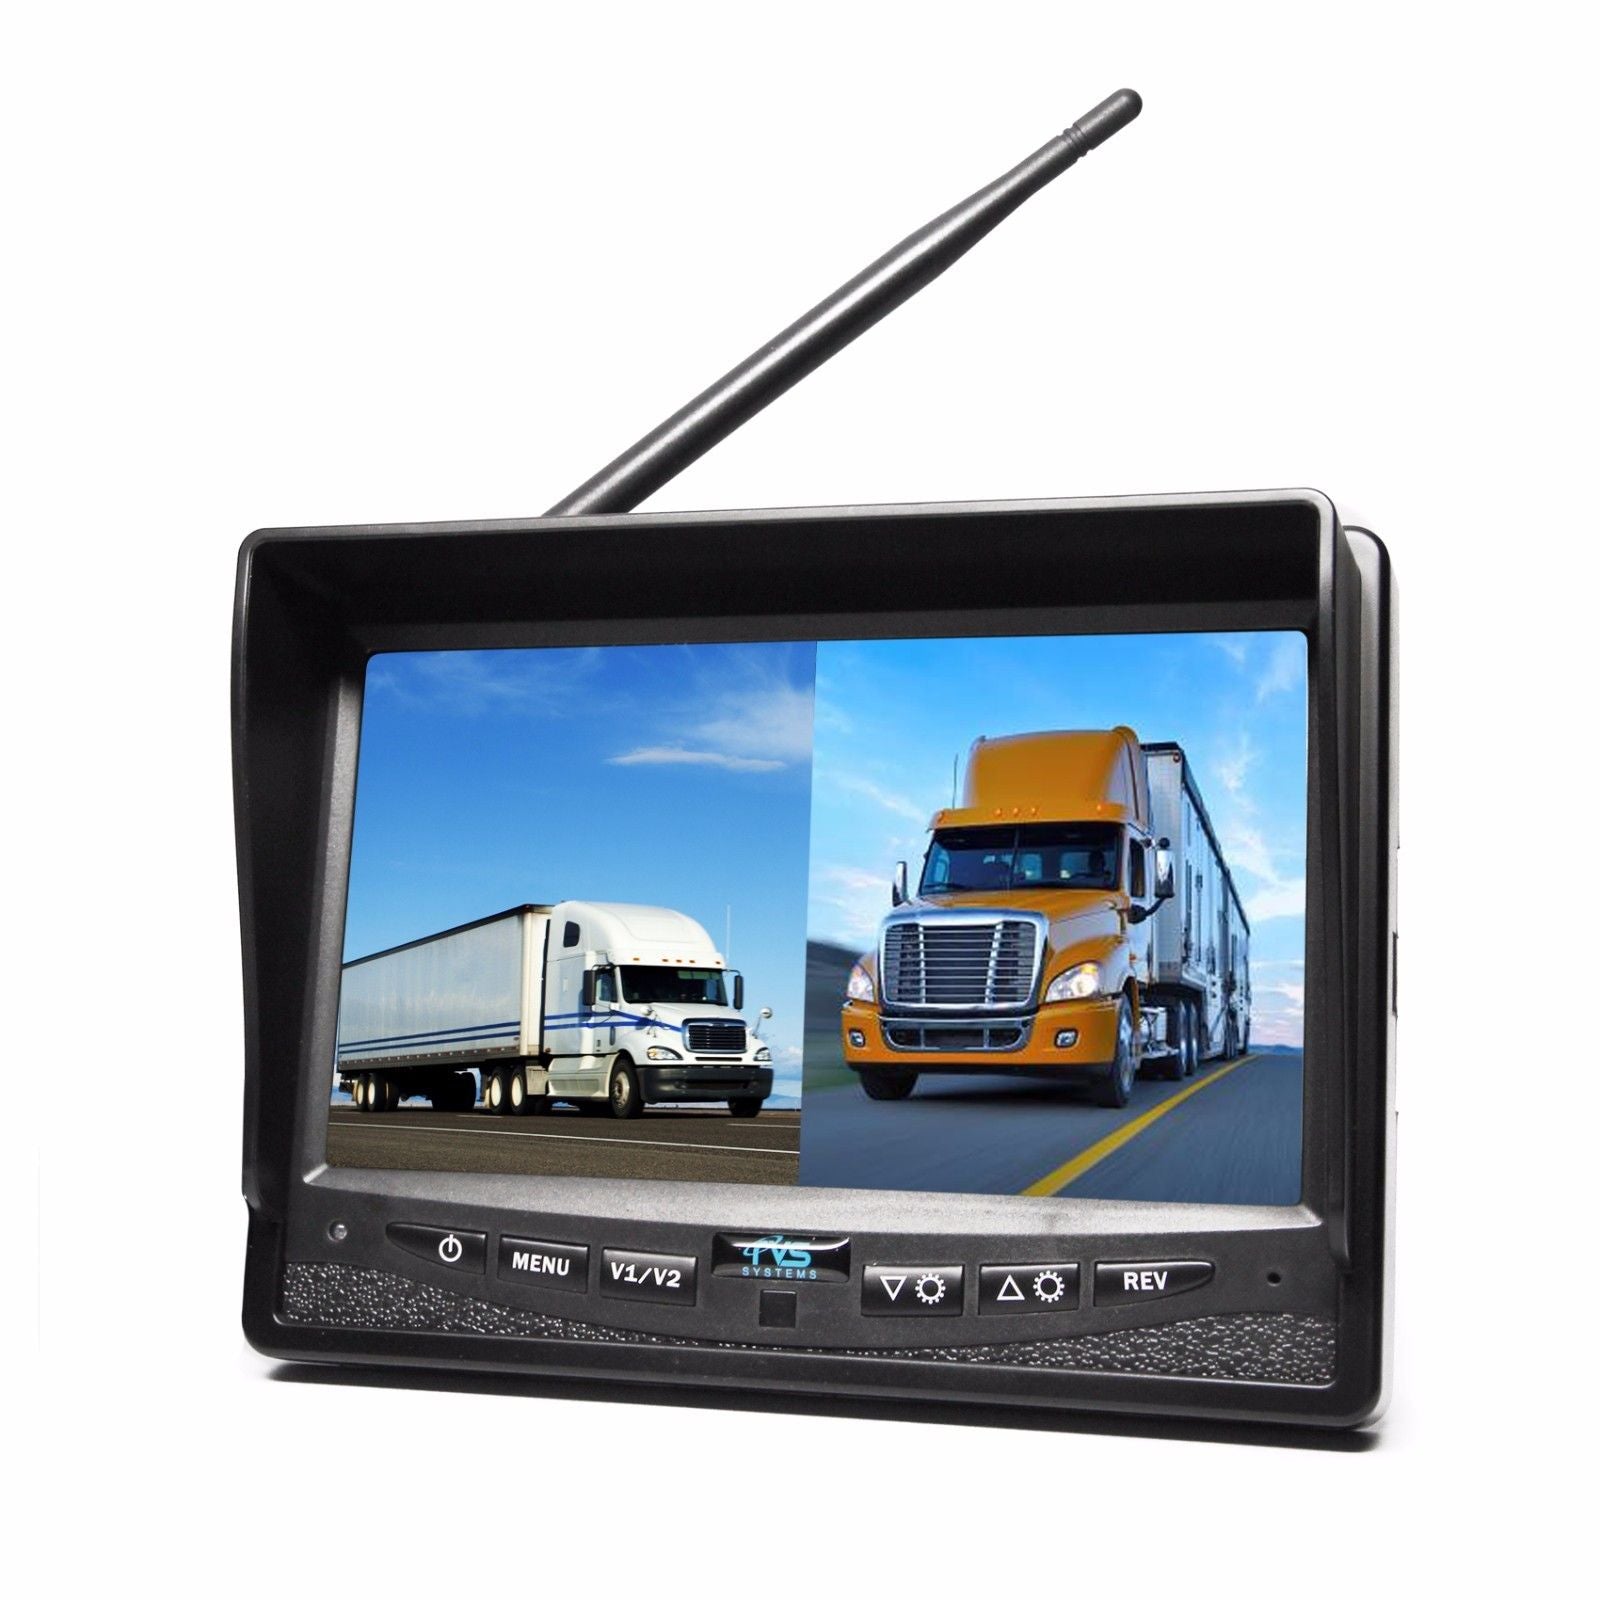 Wireless 7" LCD Split Screen Backup Camera with Cigarette Lighter Plug 130° View